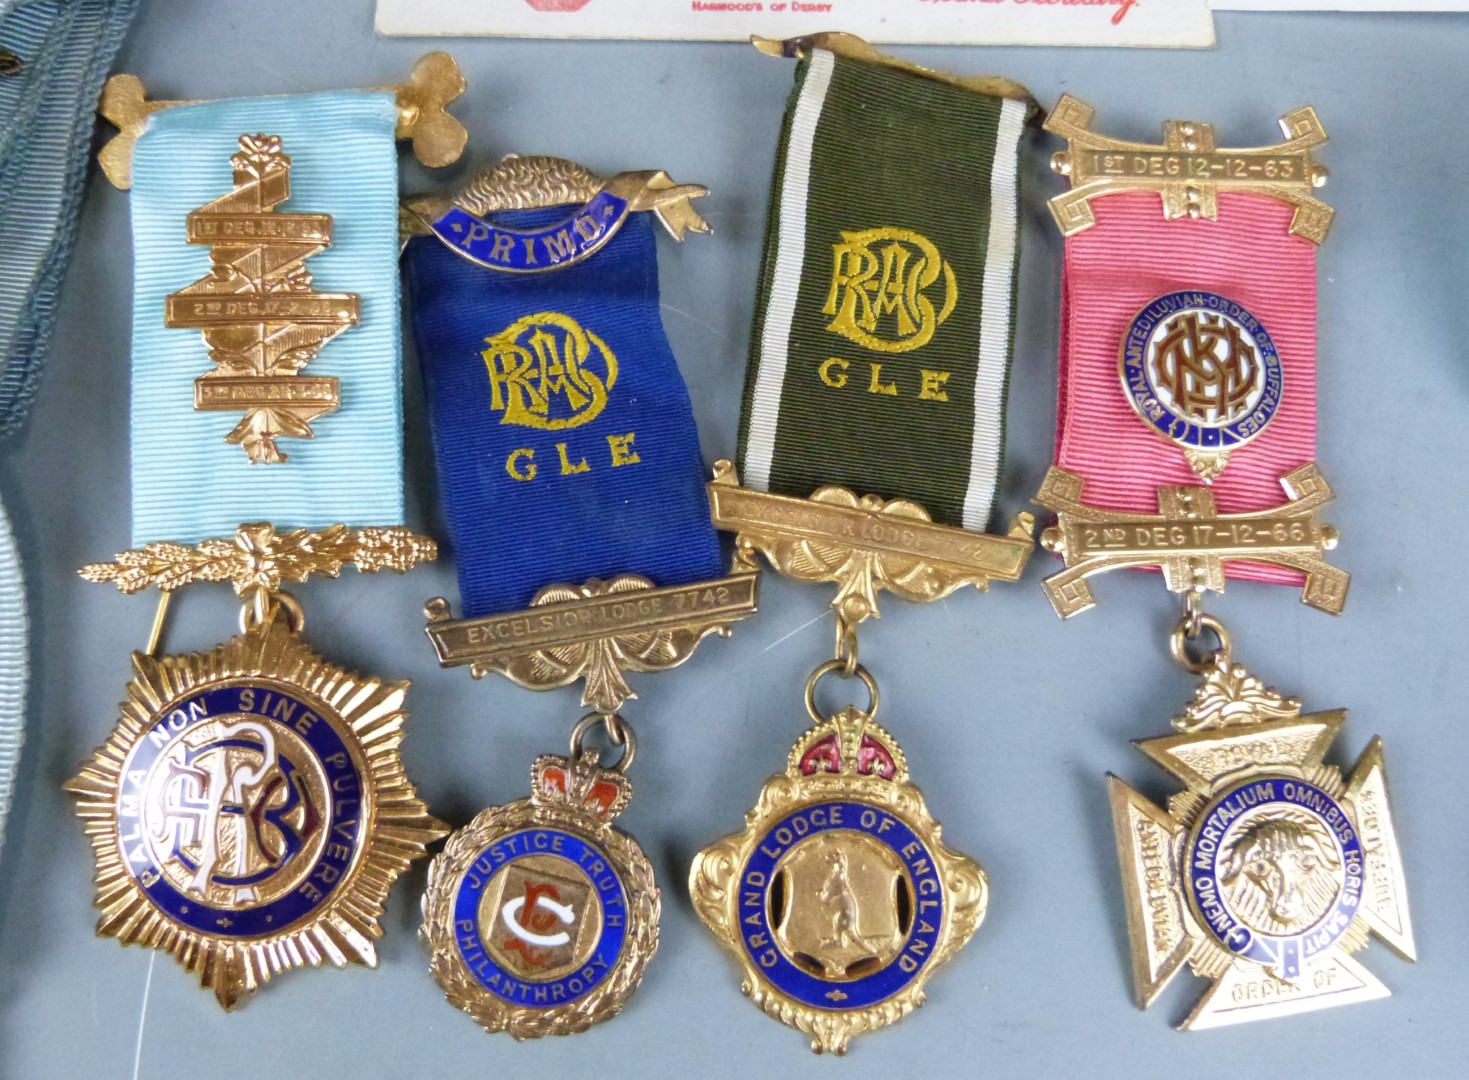 RAOB ephemera and medals including a hallmarked silver gilt example - Image 3 of 6